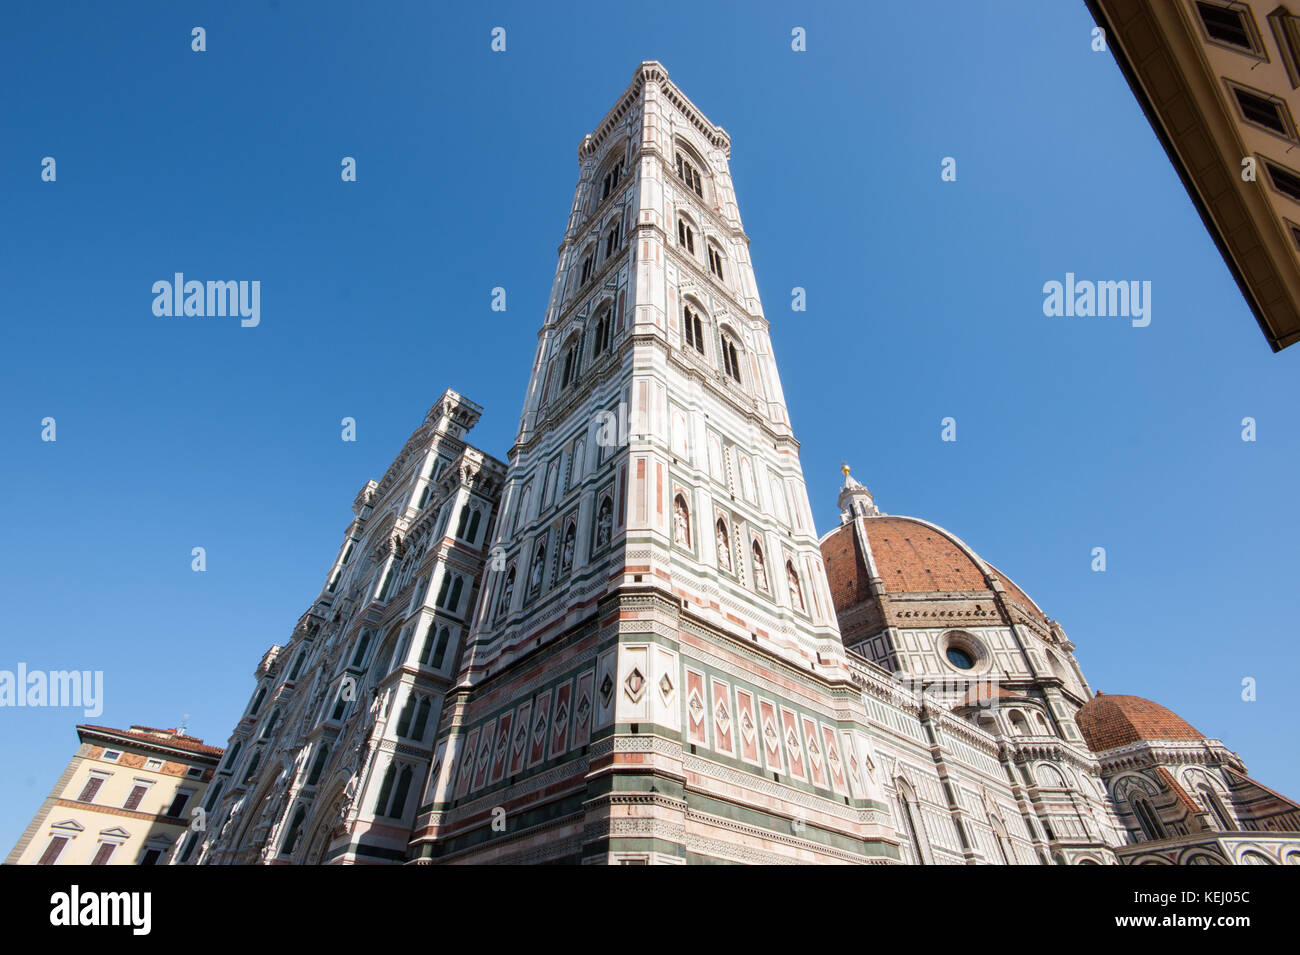 Florence, Italy, the bell tower or campanile of the Santa Maria del Fiore cathedral, designed by Giotto in the 14th century Stock Photo